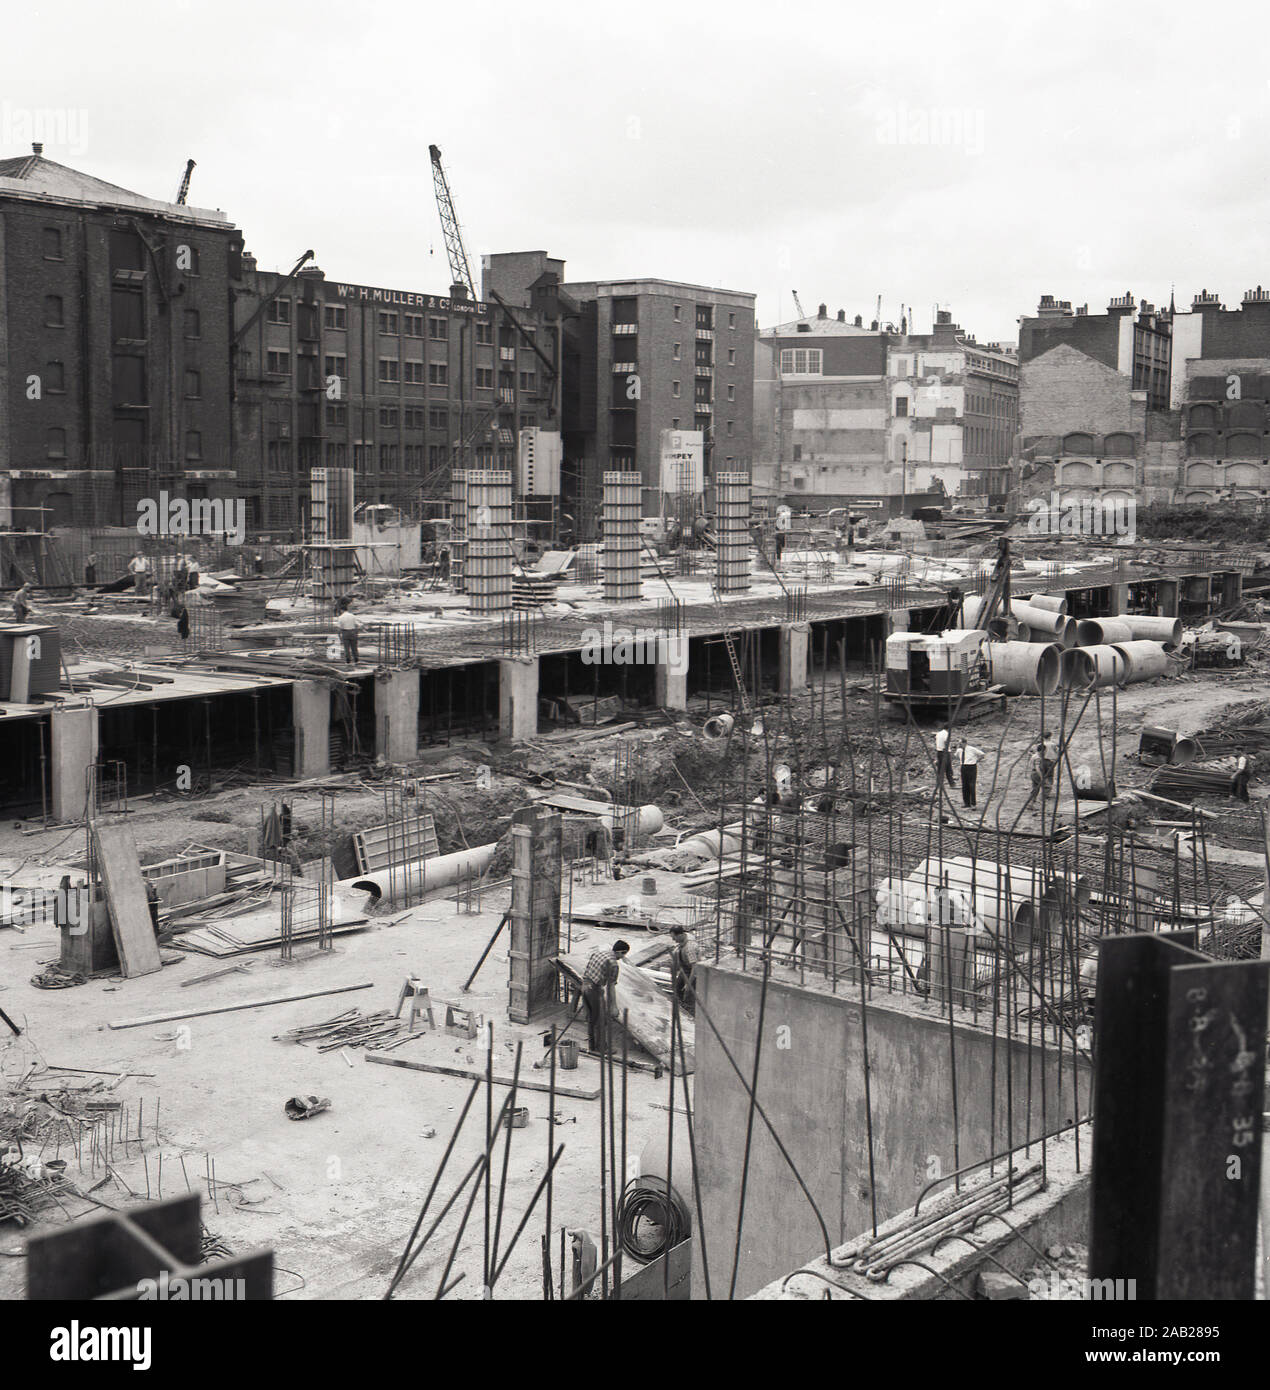 1960s, historical, construction site, city of London, England, UK, foundations for new 'modern' concrete office blocks being built. Note that none of the workmen on the giant site are wearing 'hardhats'. Stock Photo